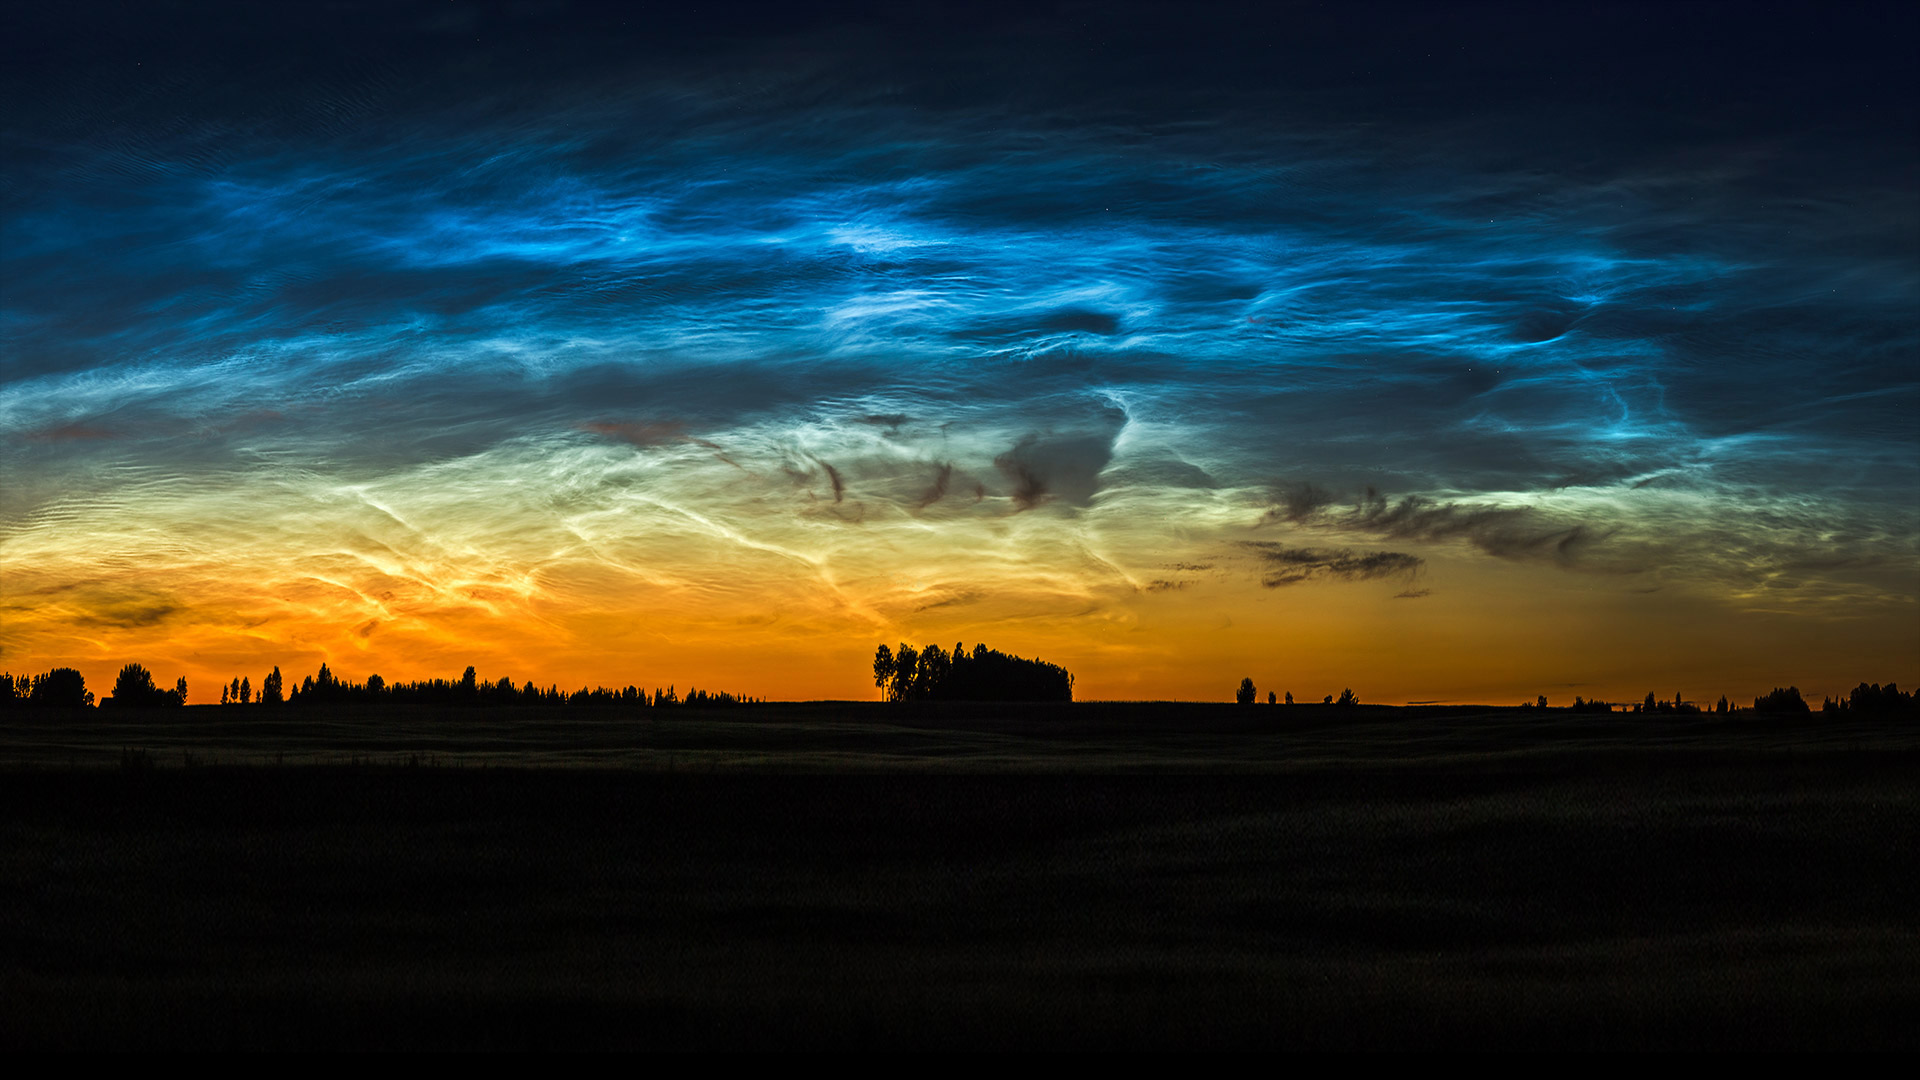 Noctilucent clouds in Lithuania - ljphoto7/Getty Images)